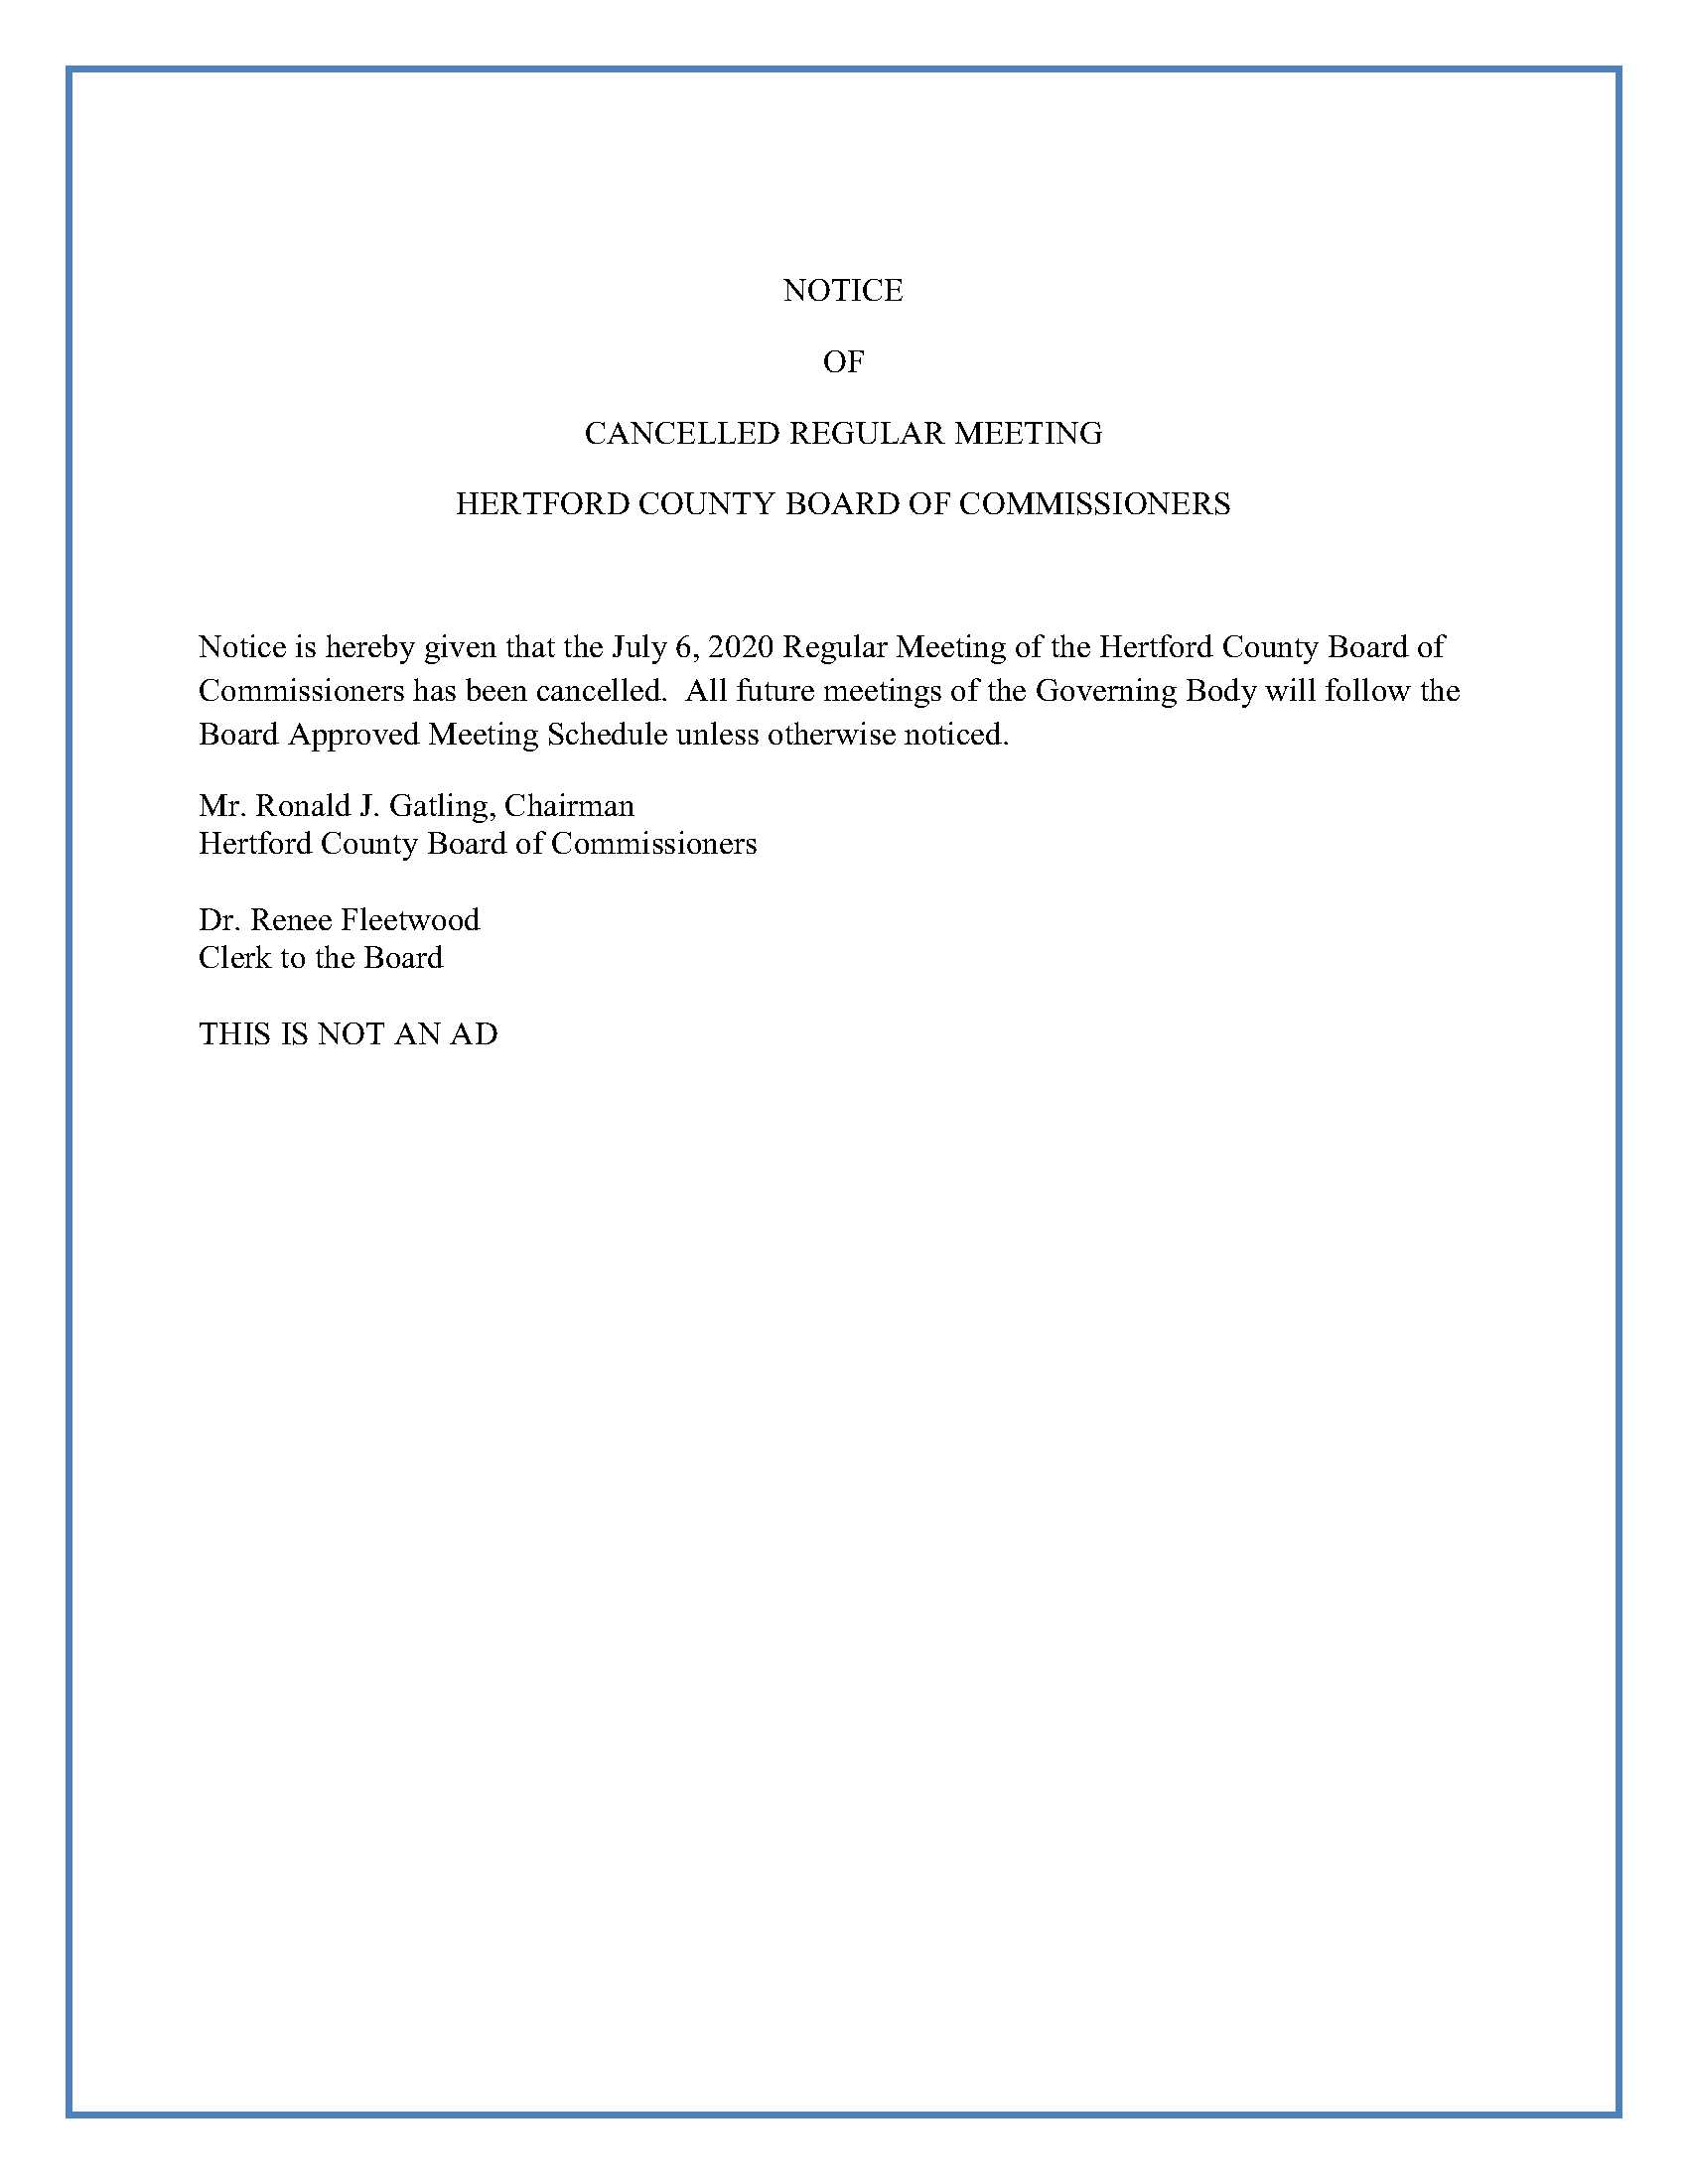 NOTICE of Cancelled Meeting_07062020